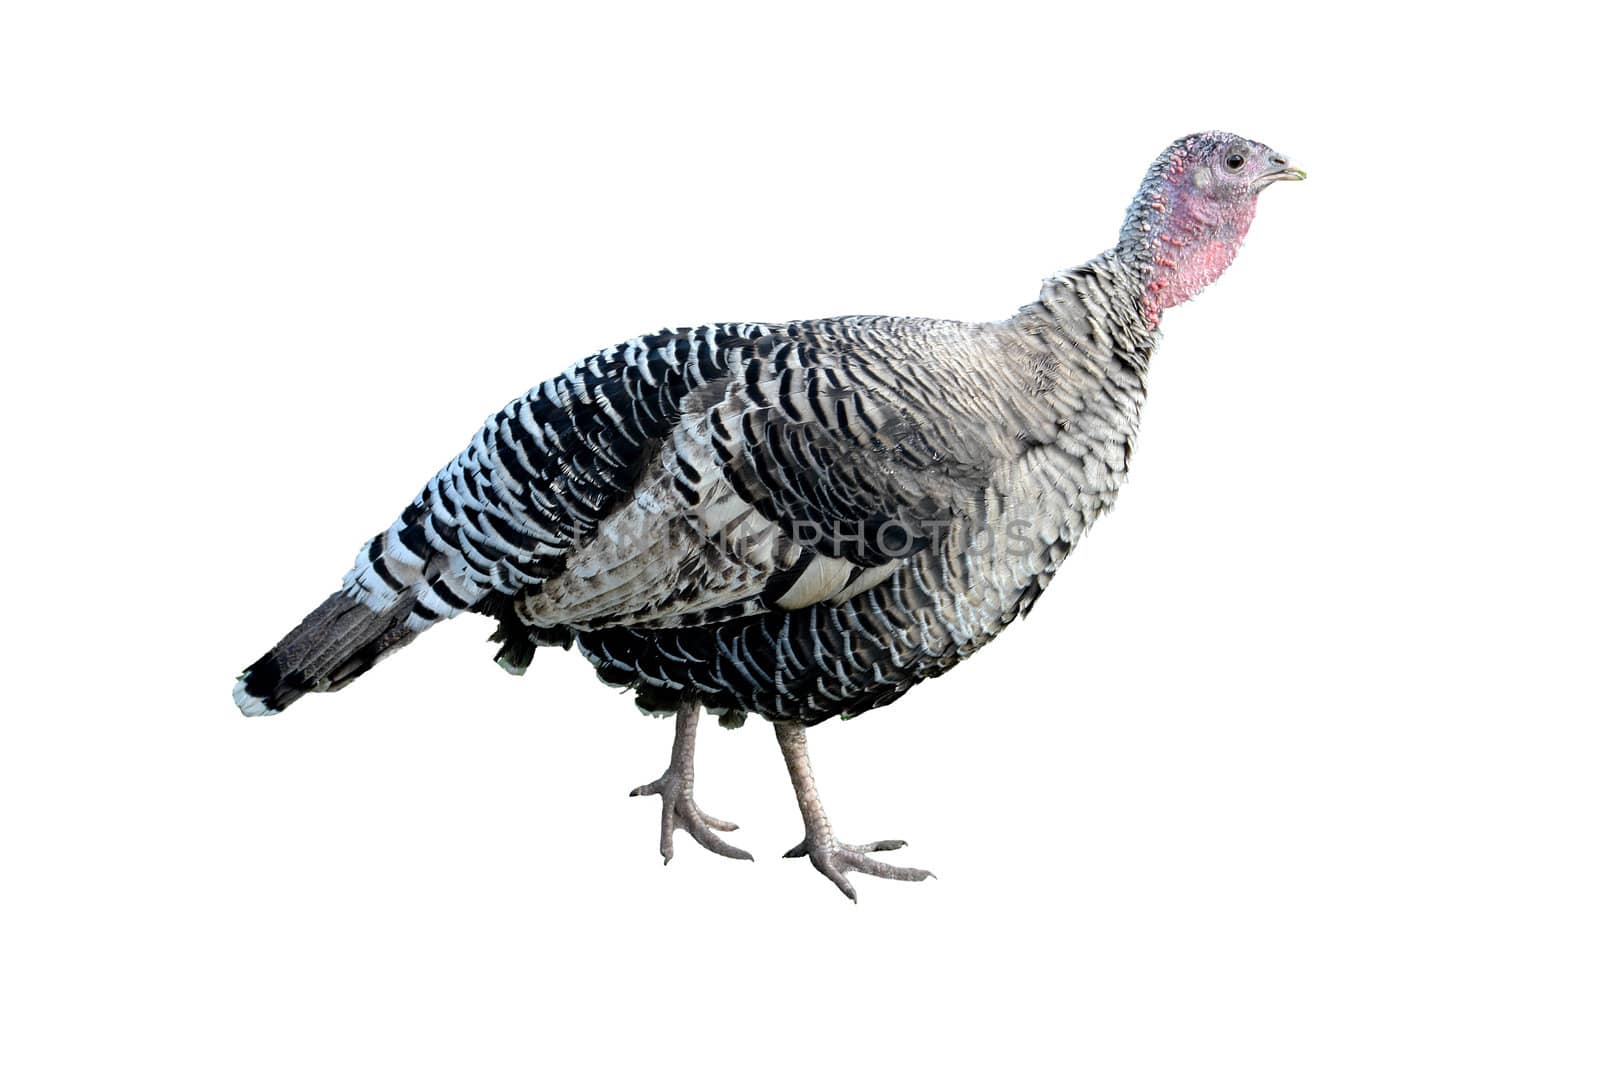 The turkey-cock on a white background